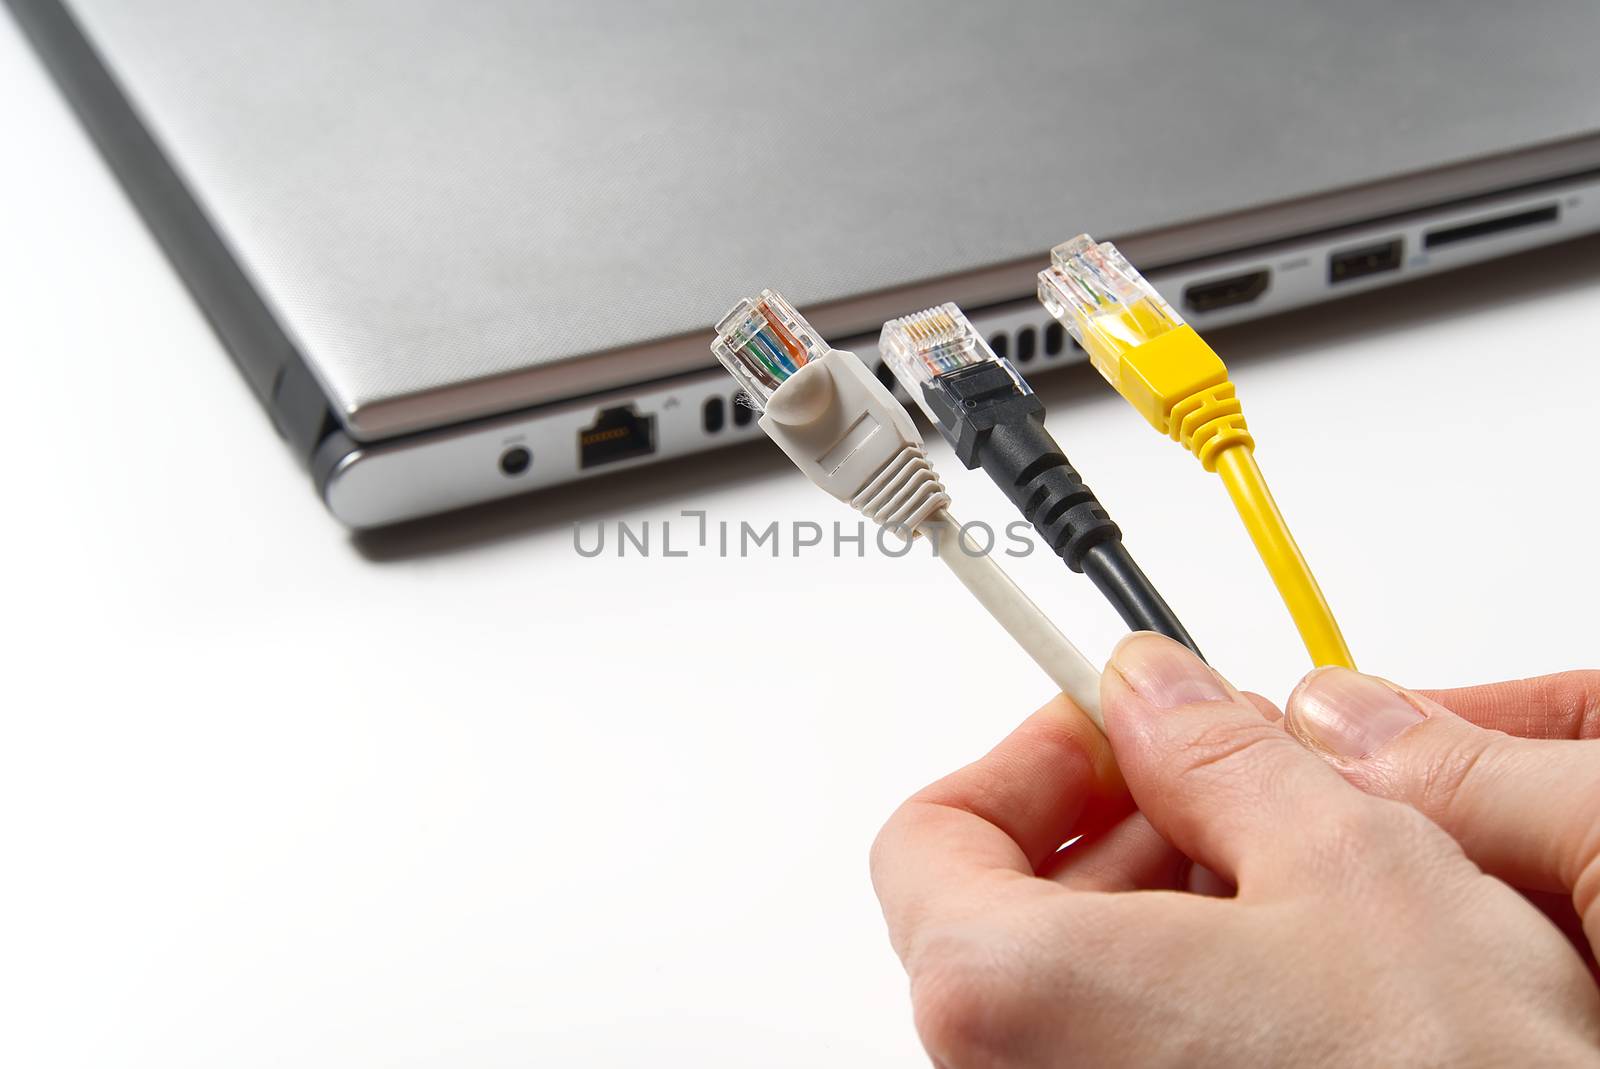 hand holds wires with high speed internet access. Internet technologies of the future. connect to the Internet every home to work from home. wires cat5 cat6